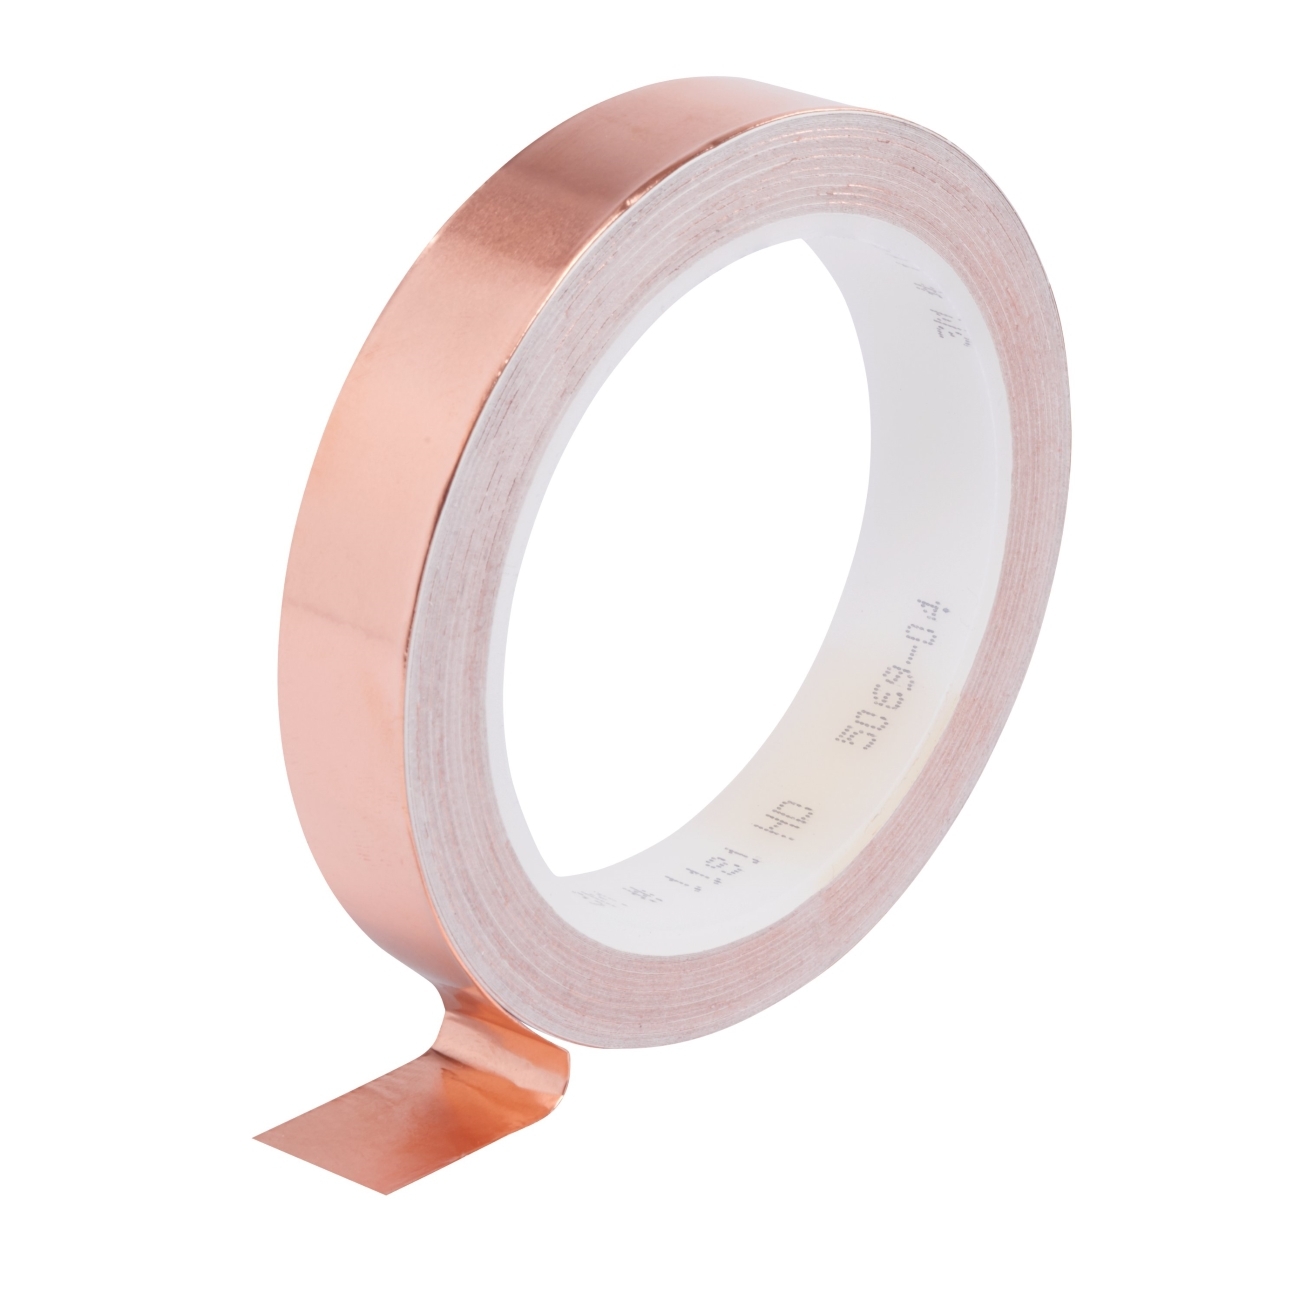 3M ET 1181 Copper foil smooth, with conductive adhesive, copper, 15 mm x 16.5 m x 0.07 mm